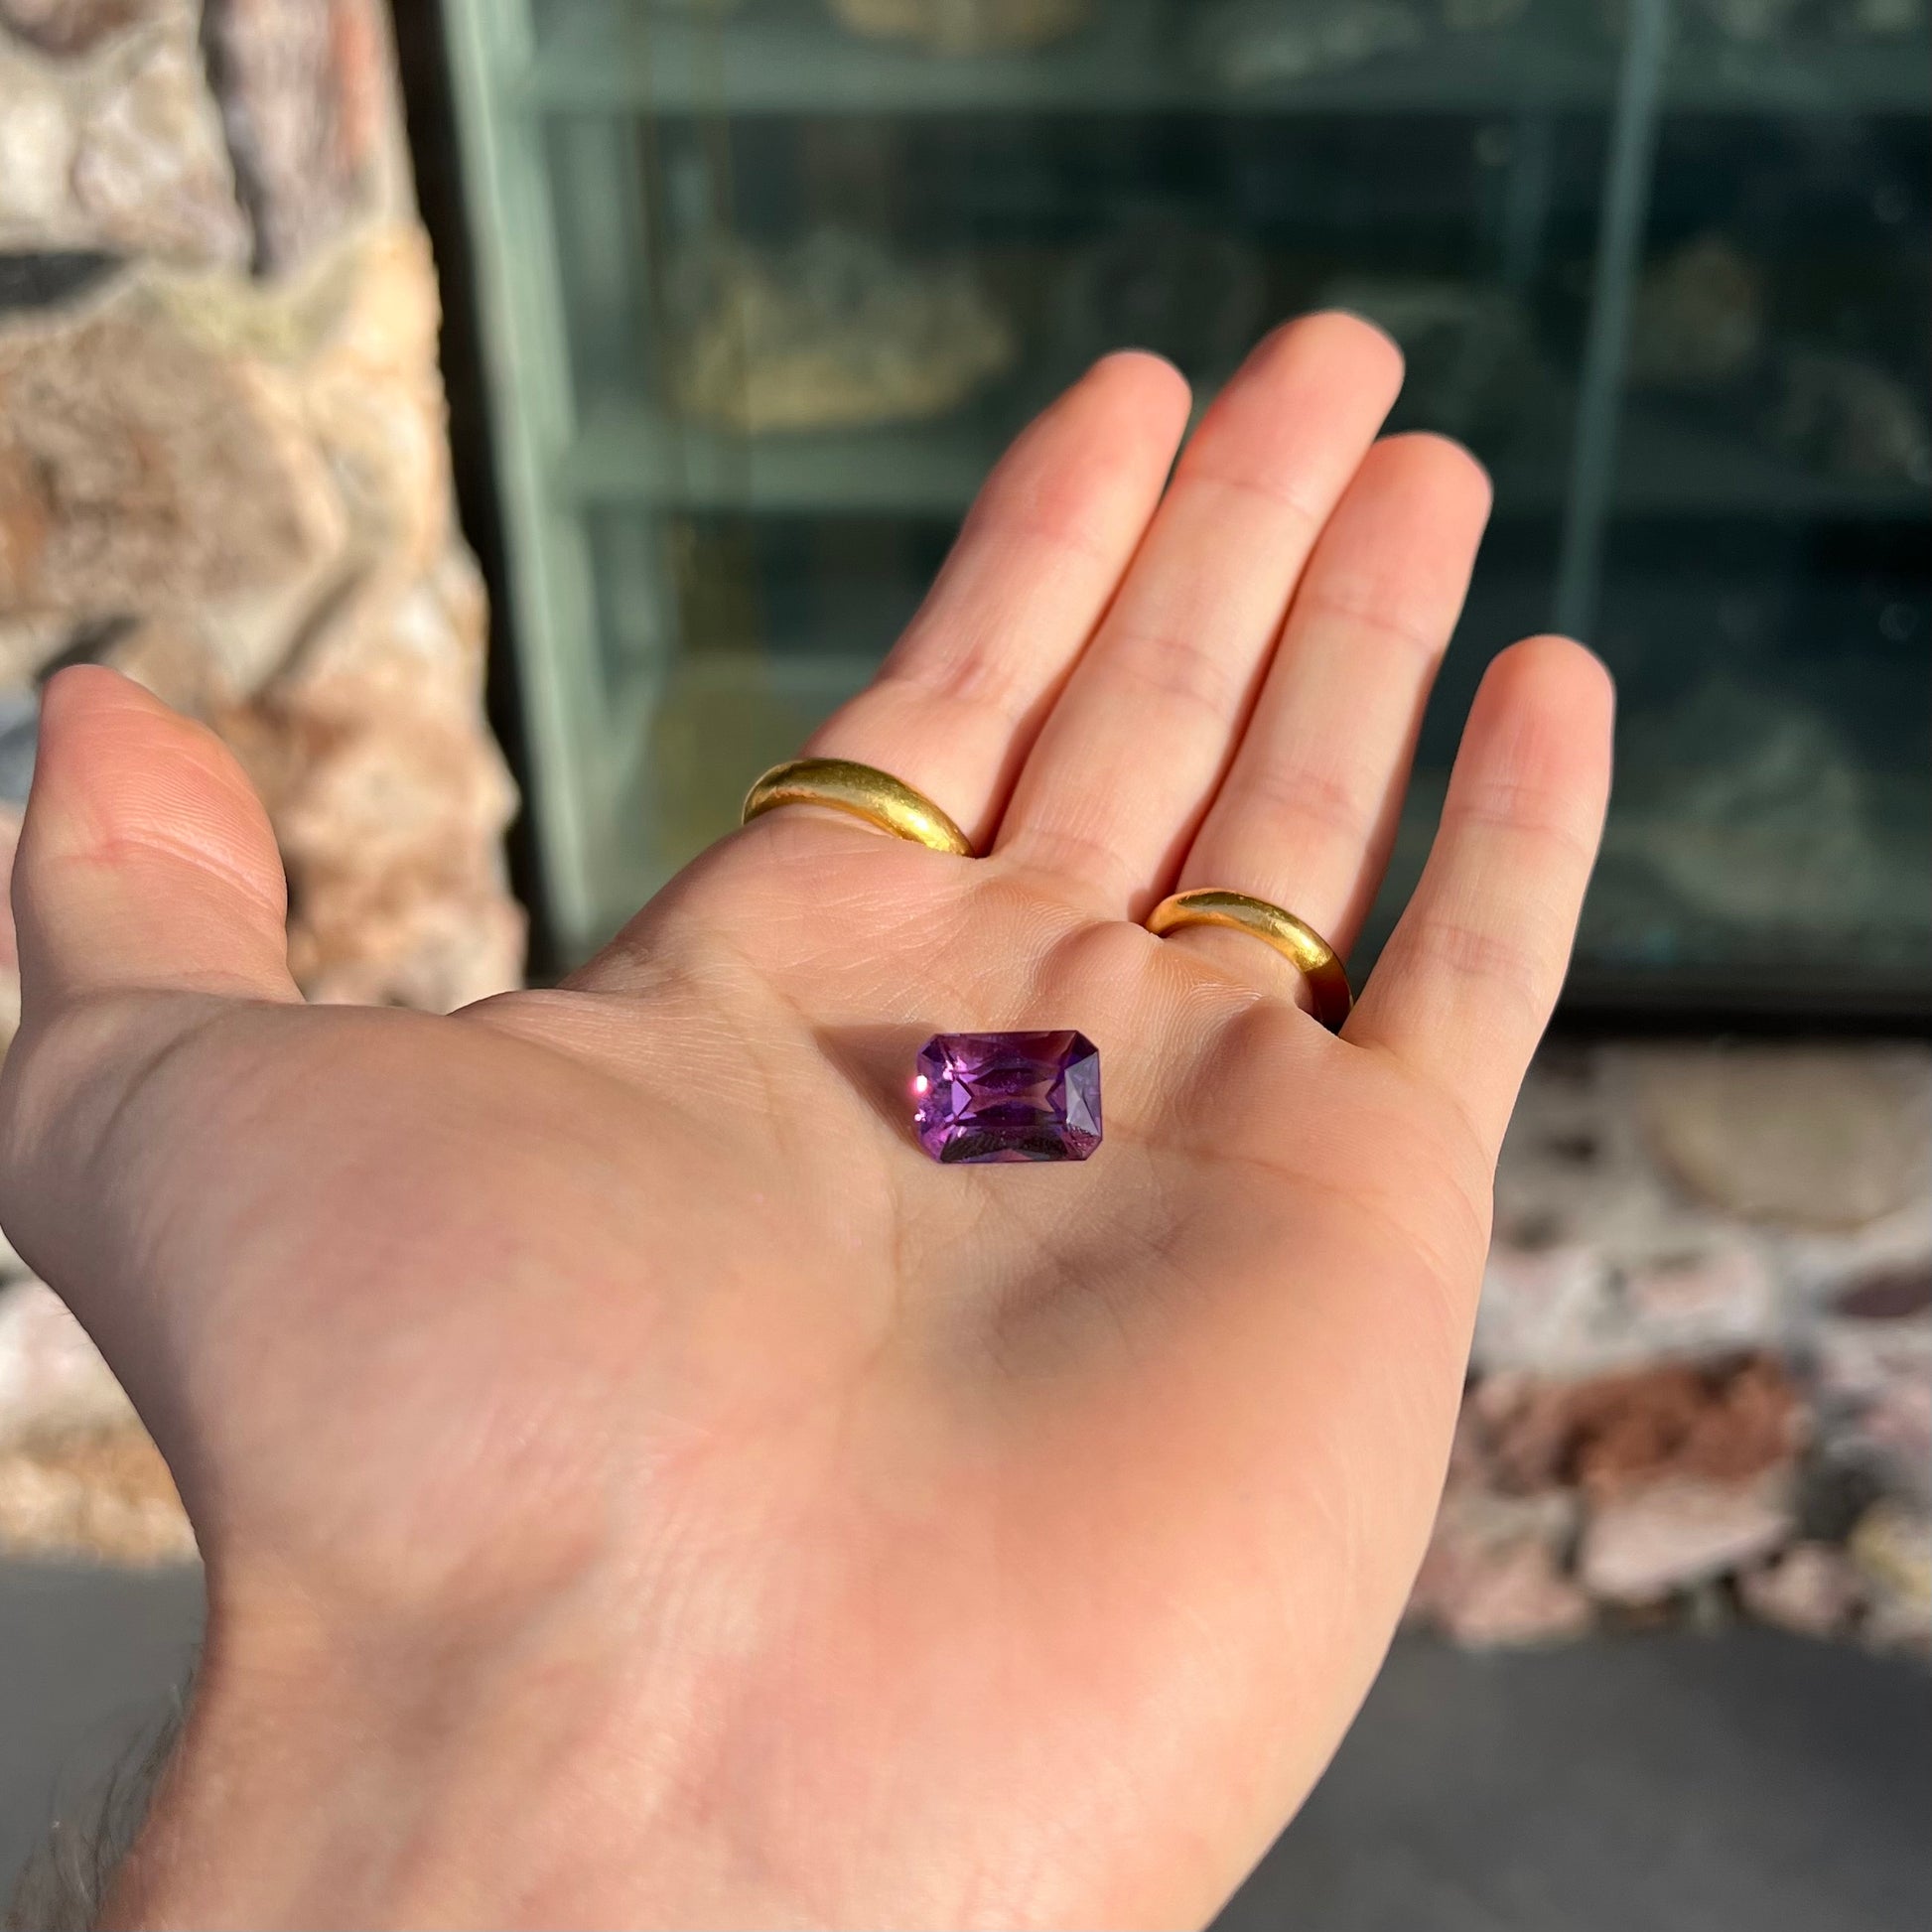 A loose, modified radiant cut amethyst stone.